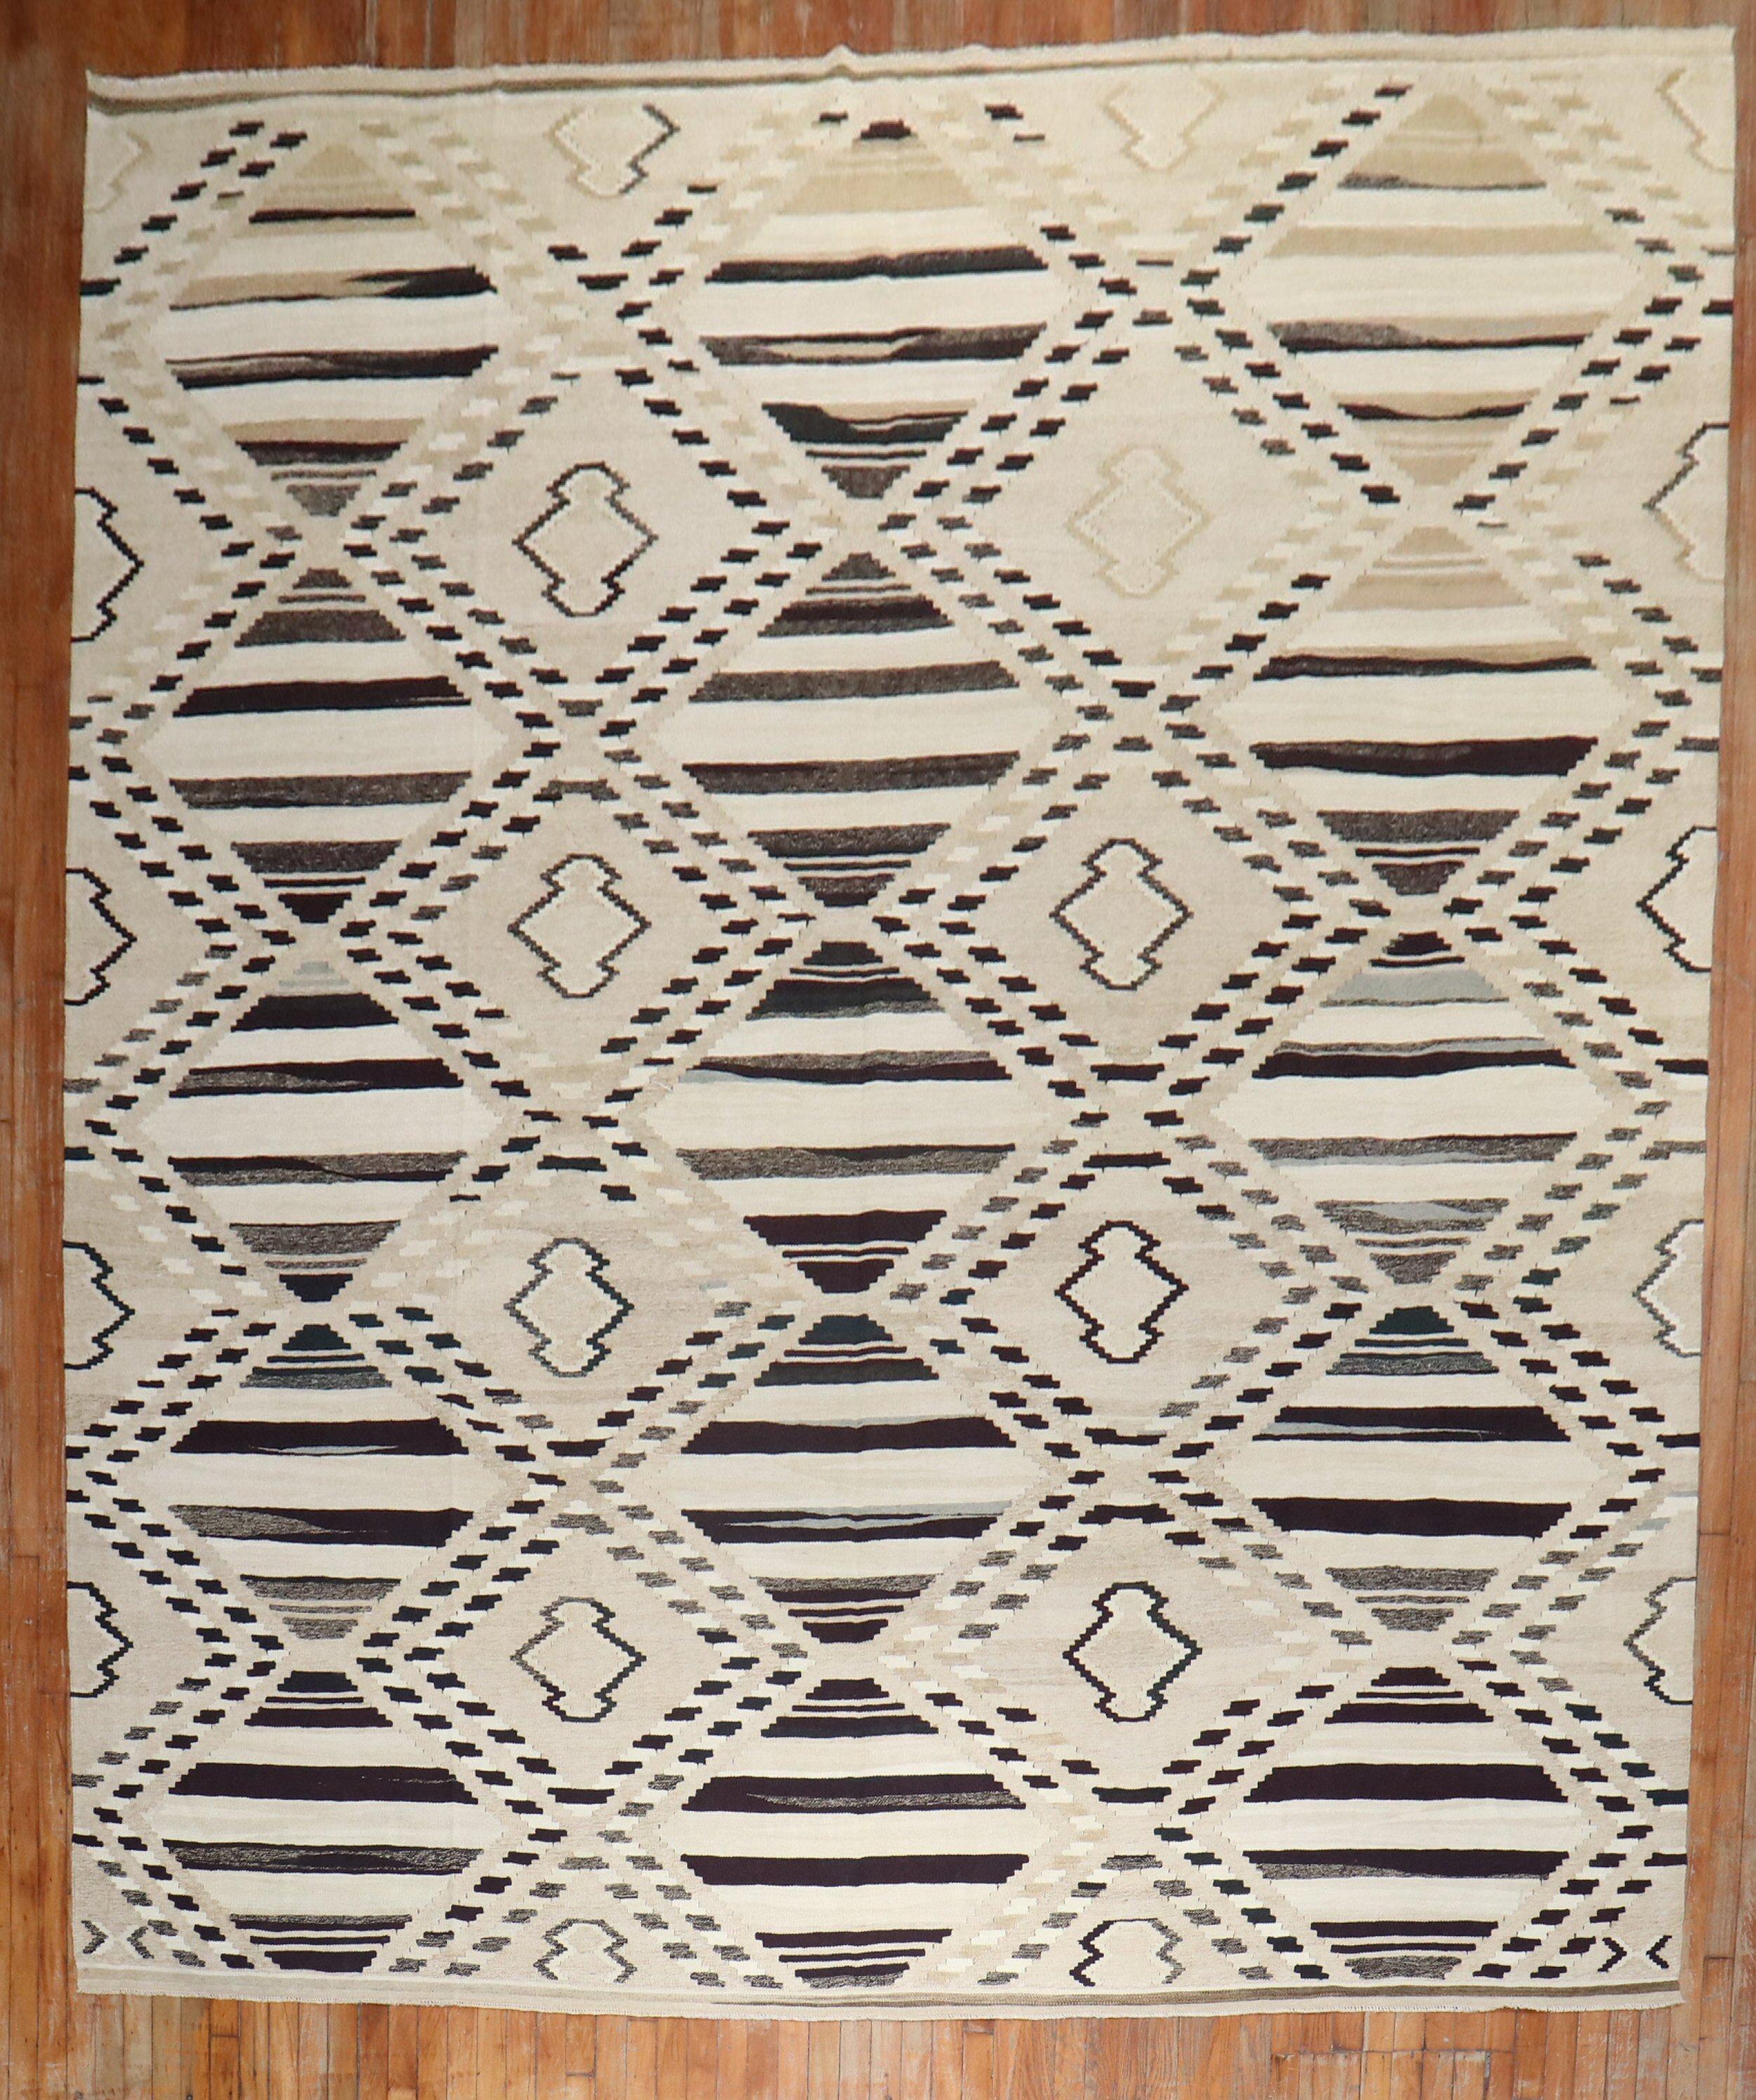 Late 20th-century geometric kilim in brown, ivory and camel tones

Measures: 10'1'' x 14'.